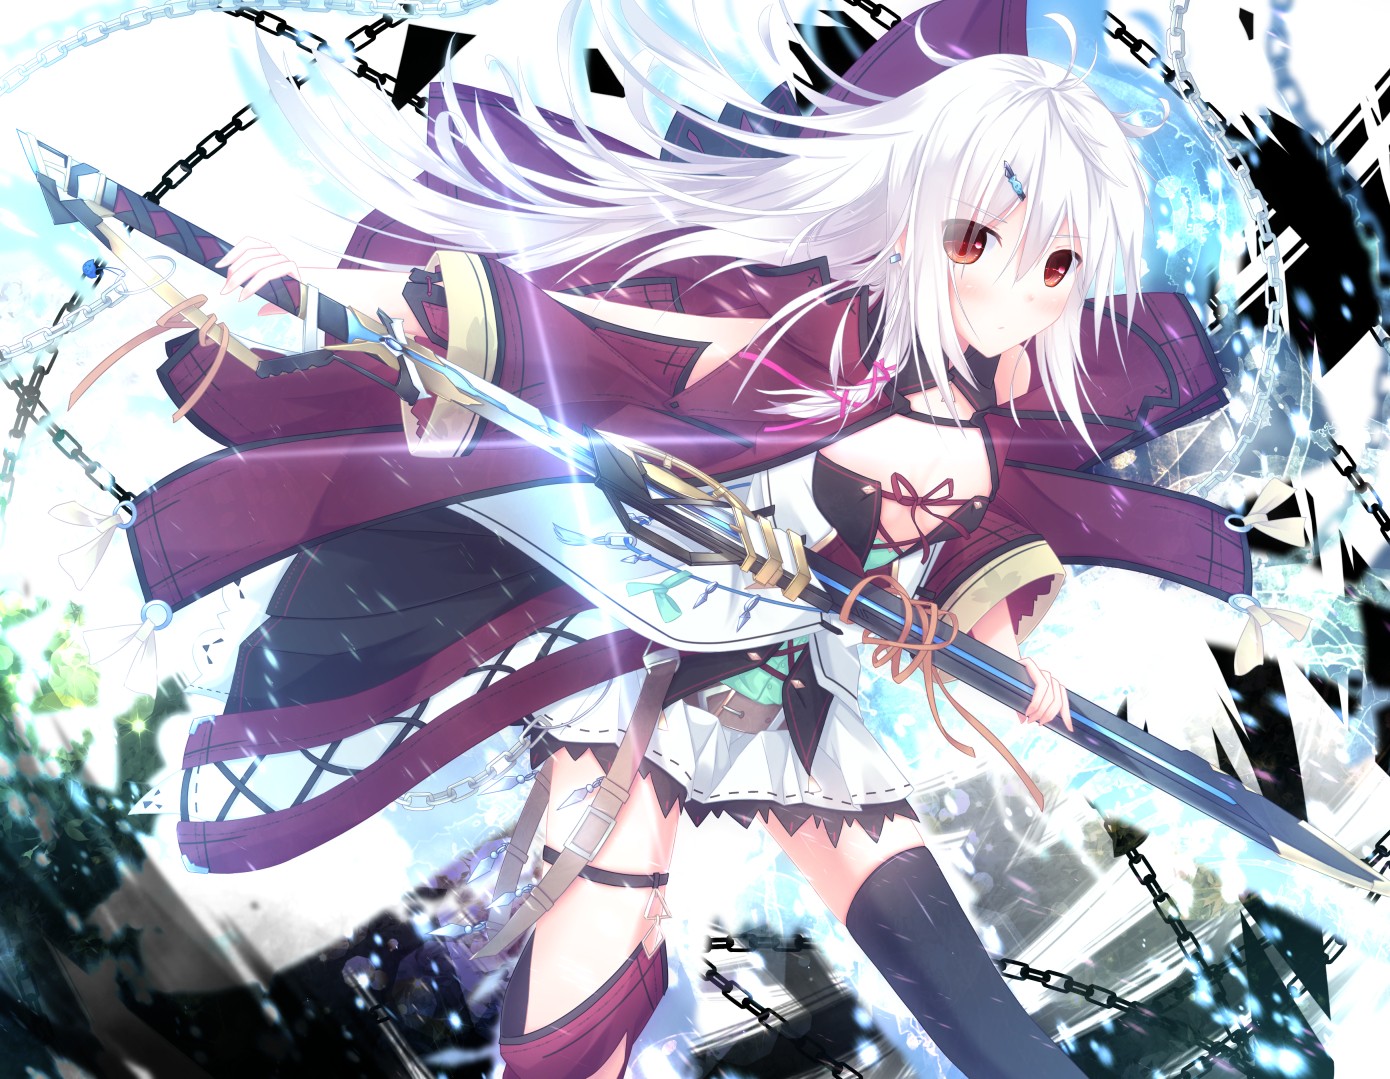 Original Characters Long Hair Fantasy Girl Women With Swords Red Eyes Jewelry Ribbon